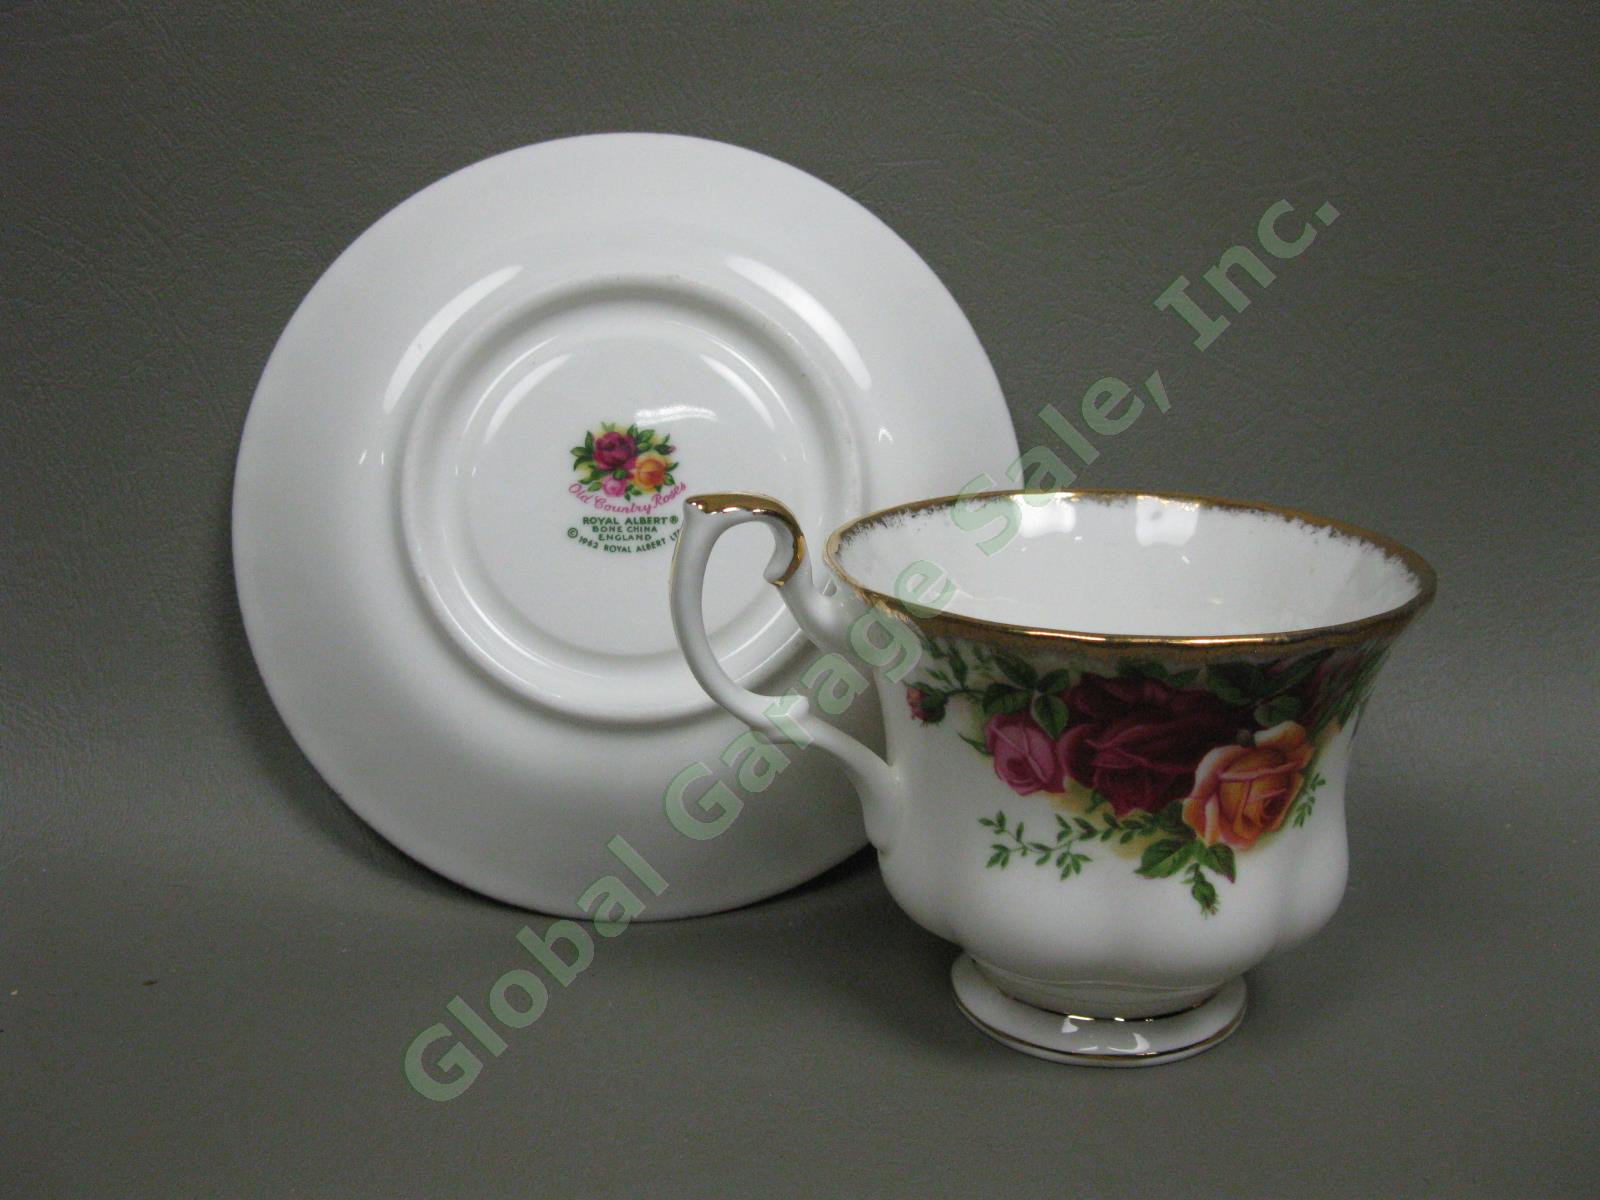 4 Royal Albert Old Country Roses Place Settings Serving Bowl Platter Plate Set 19